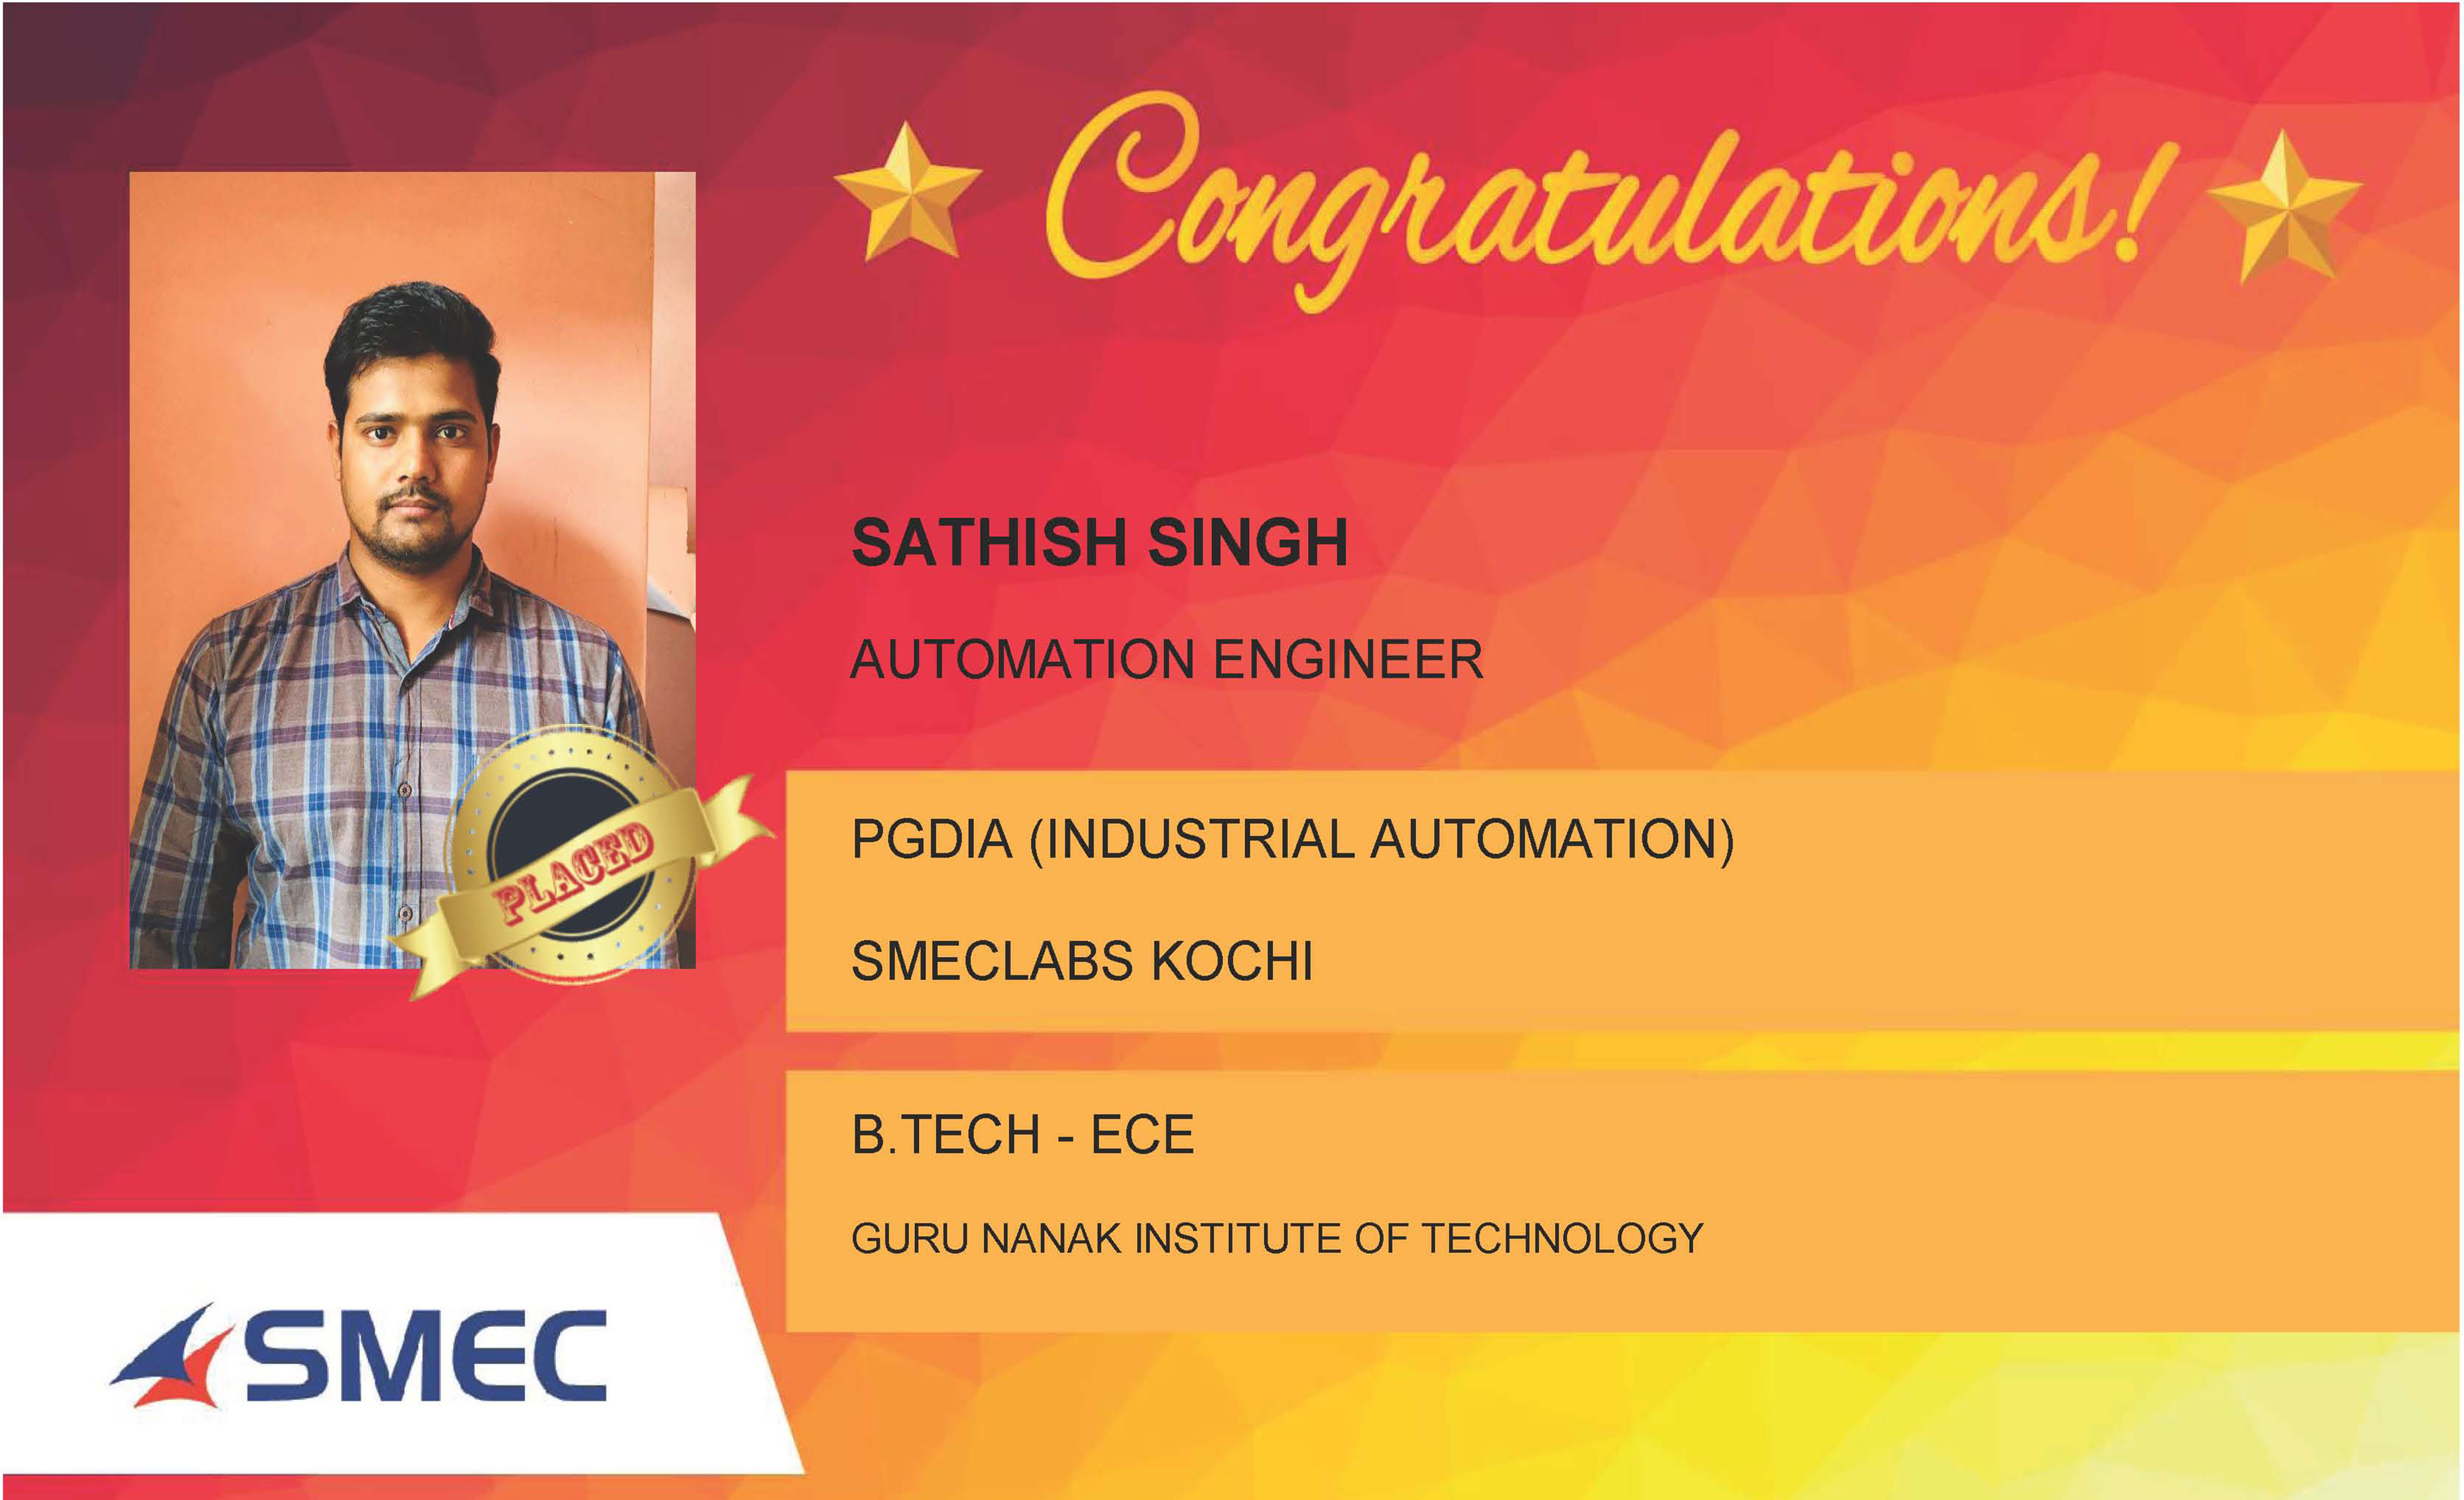 Sathish Singh Placed Successfully Automation Engineer